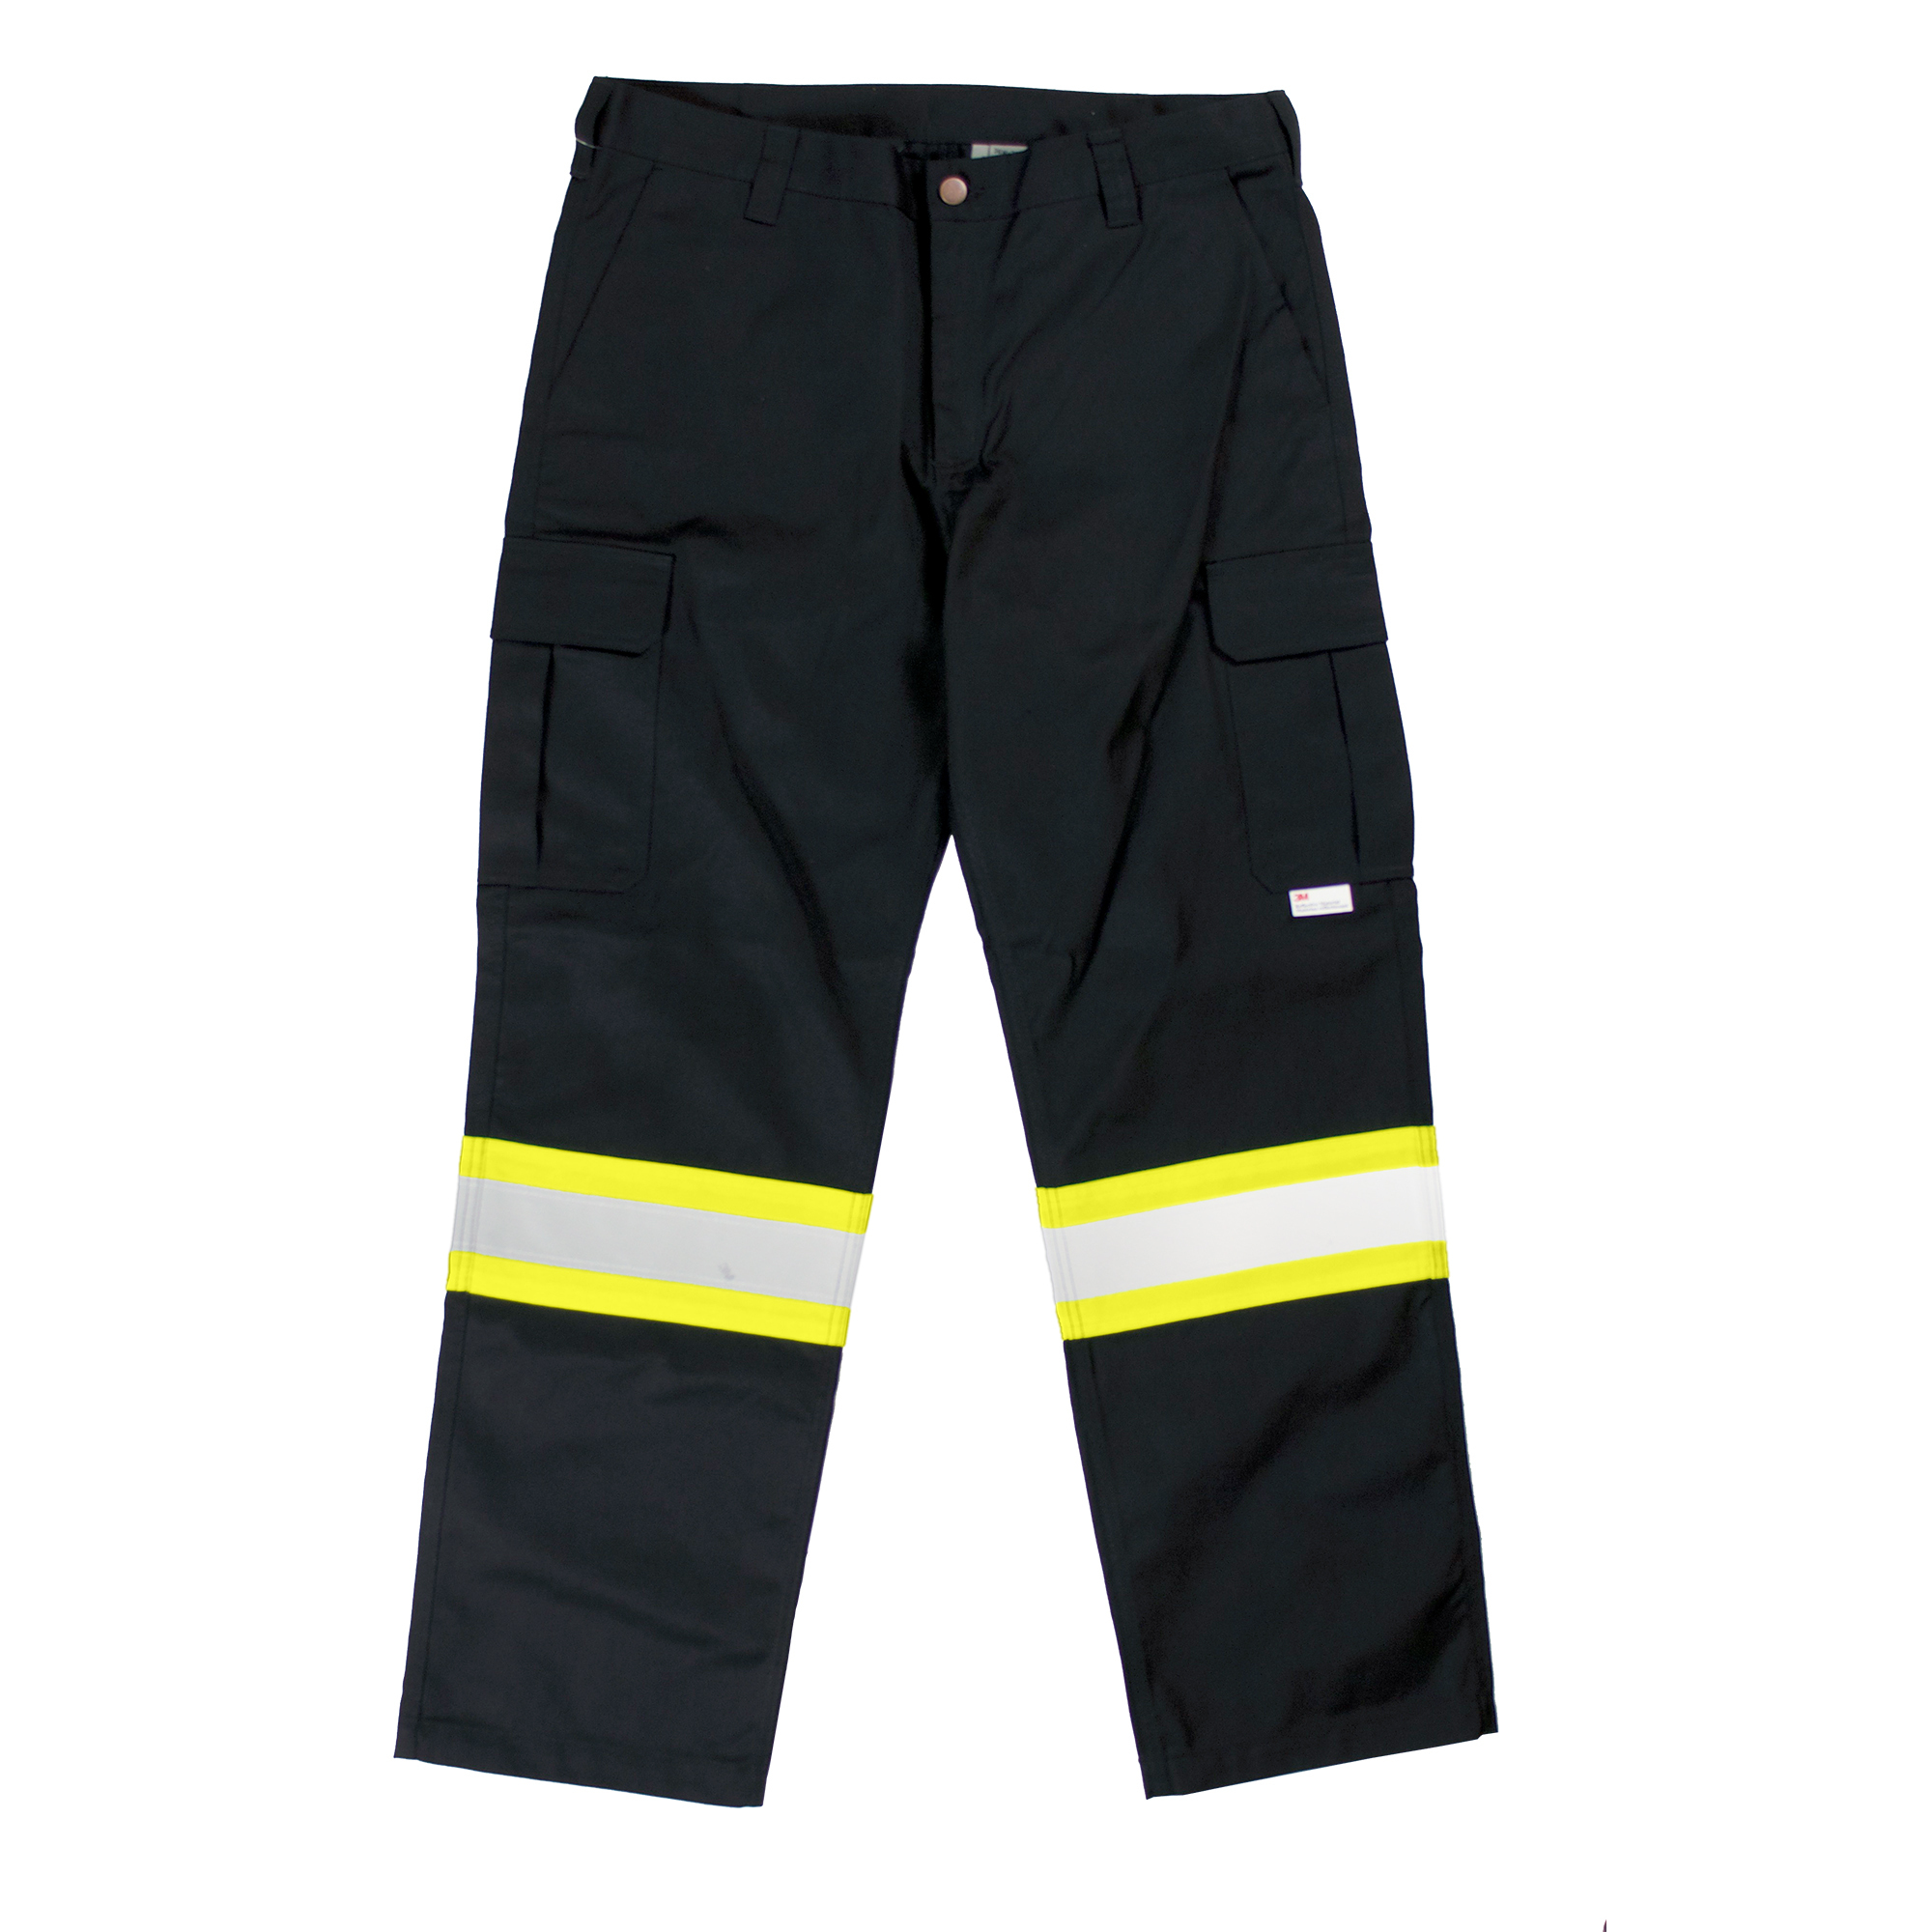 Tough Duck, Safety Cargo Utility Pant, Waist 40 in, Inseam 30 in, Color Black, Model S60701